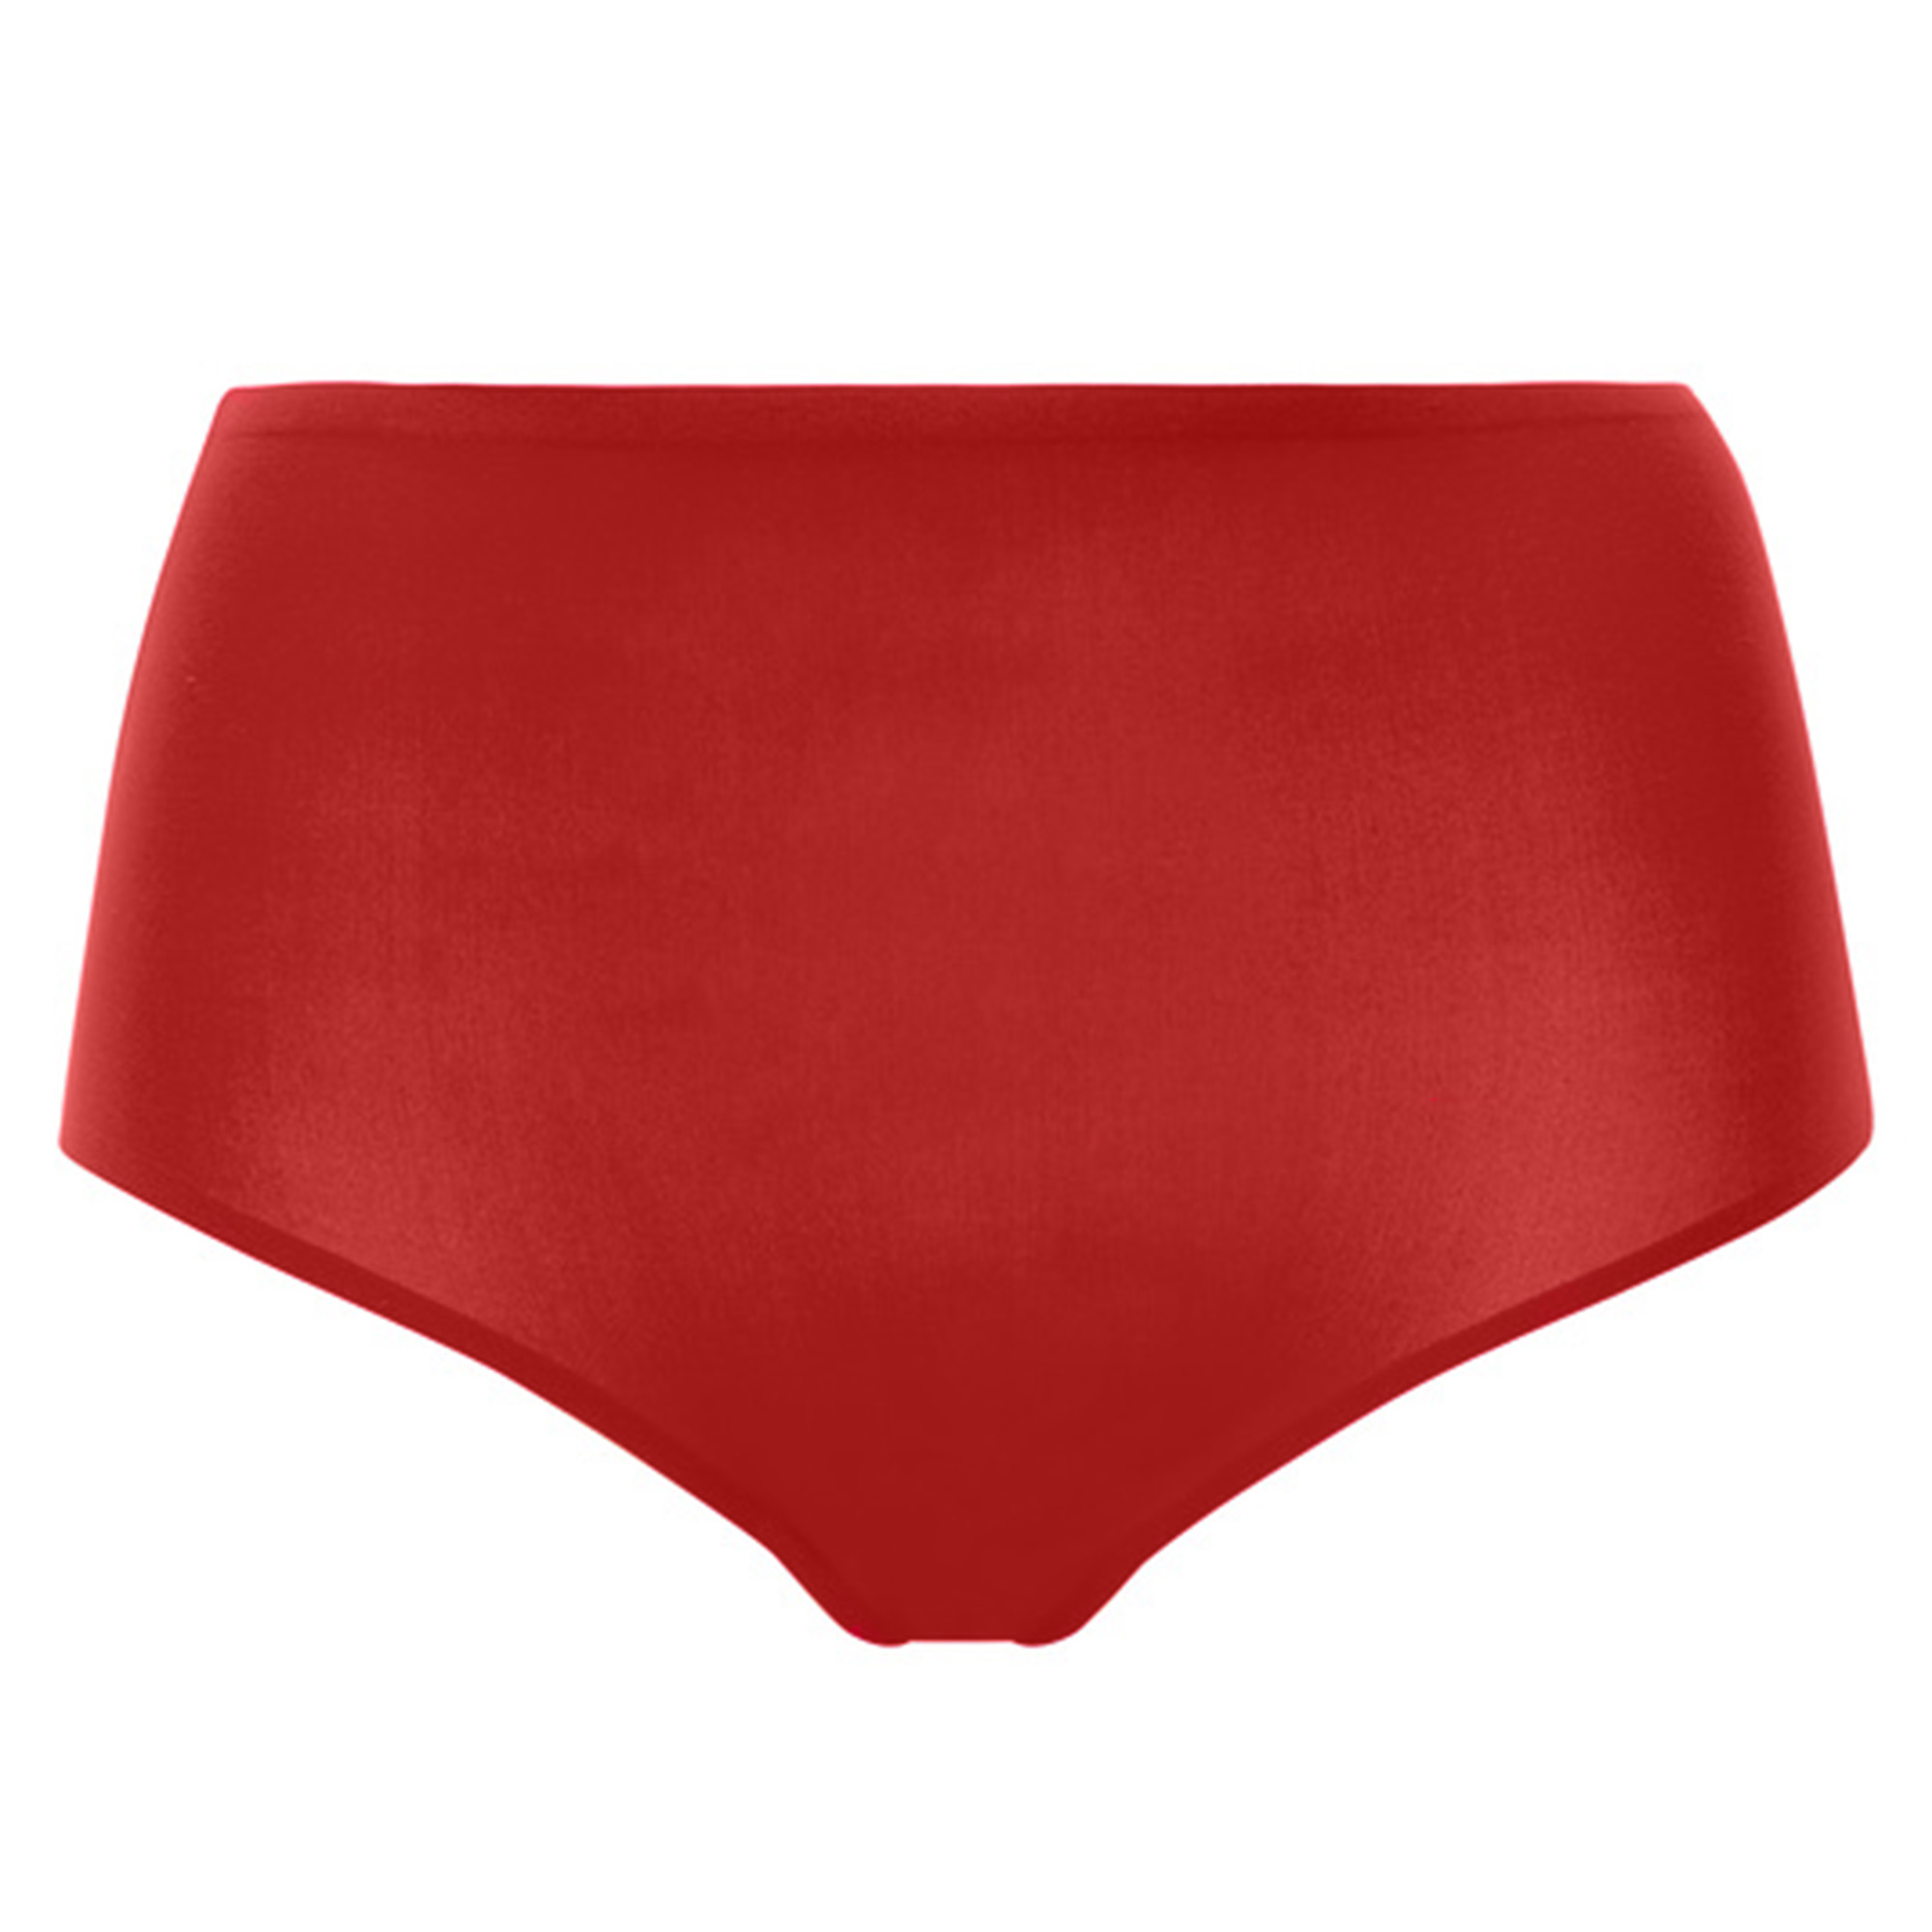 автокресло chicco seat up 012 red passion 07079828640000 Трусы Chantelle Panty 1er Pack, цвет Rot (Passion Red)